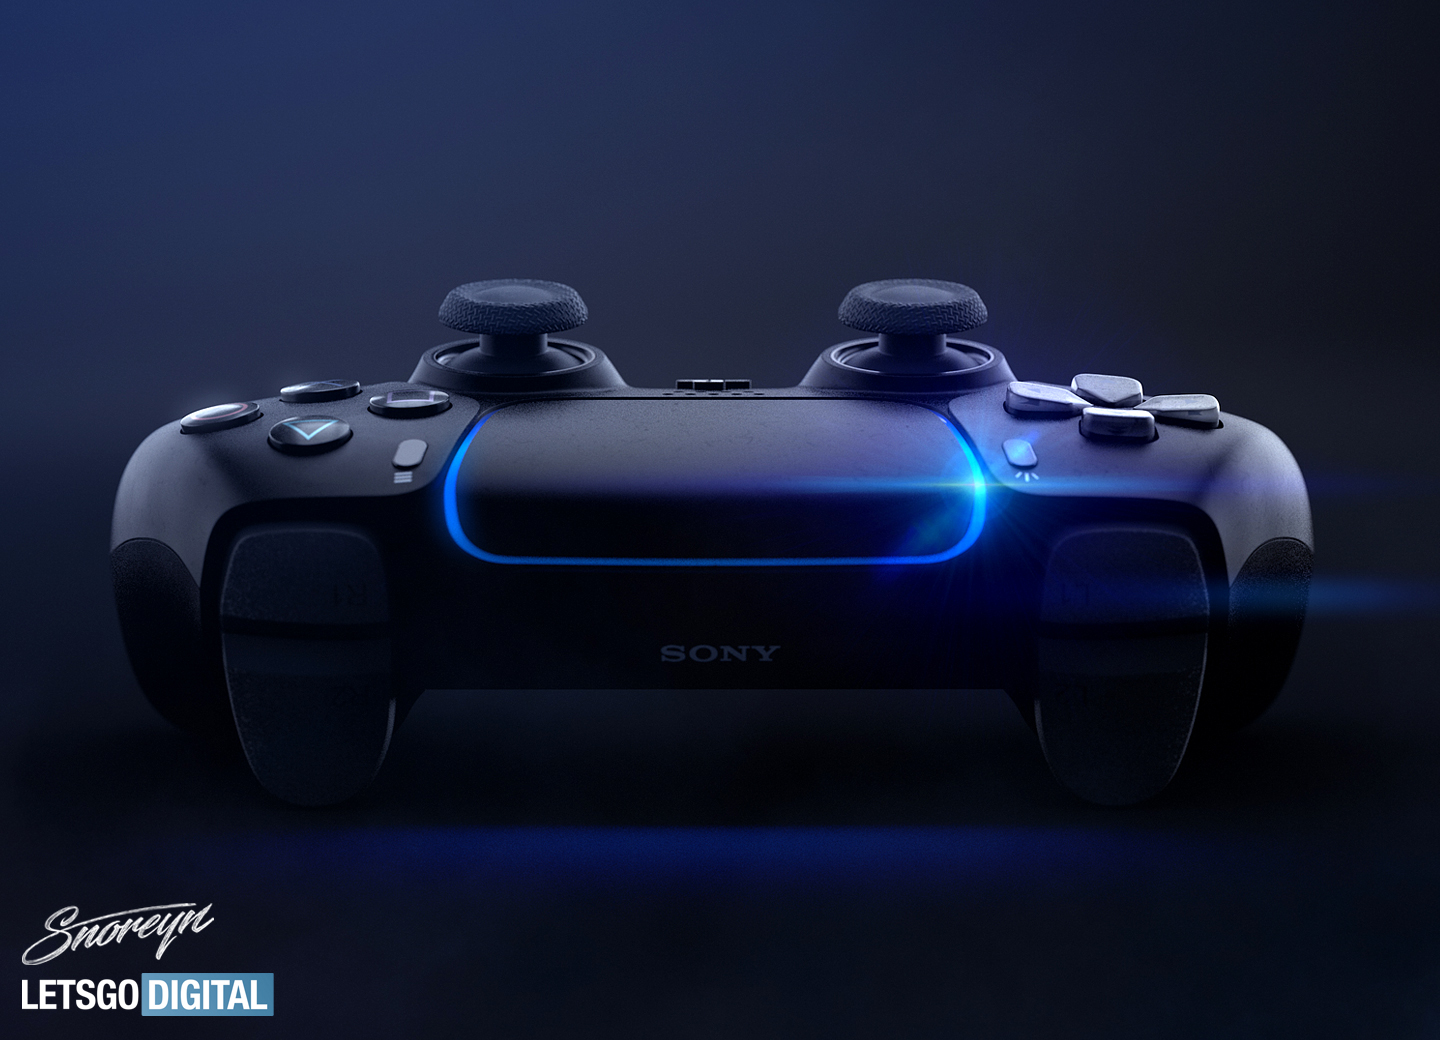 Ps5 premium. Sony PLAYSTATION 5. PS 5. Плейстейшен ps5. Сони ps5. Геймпад Sony PLAYSTATION 5 Dualsense.